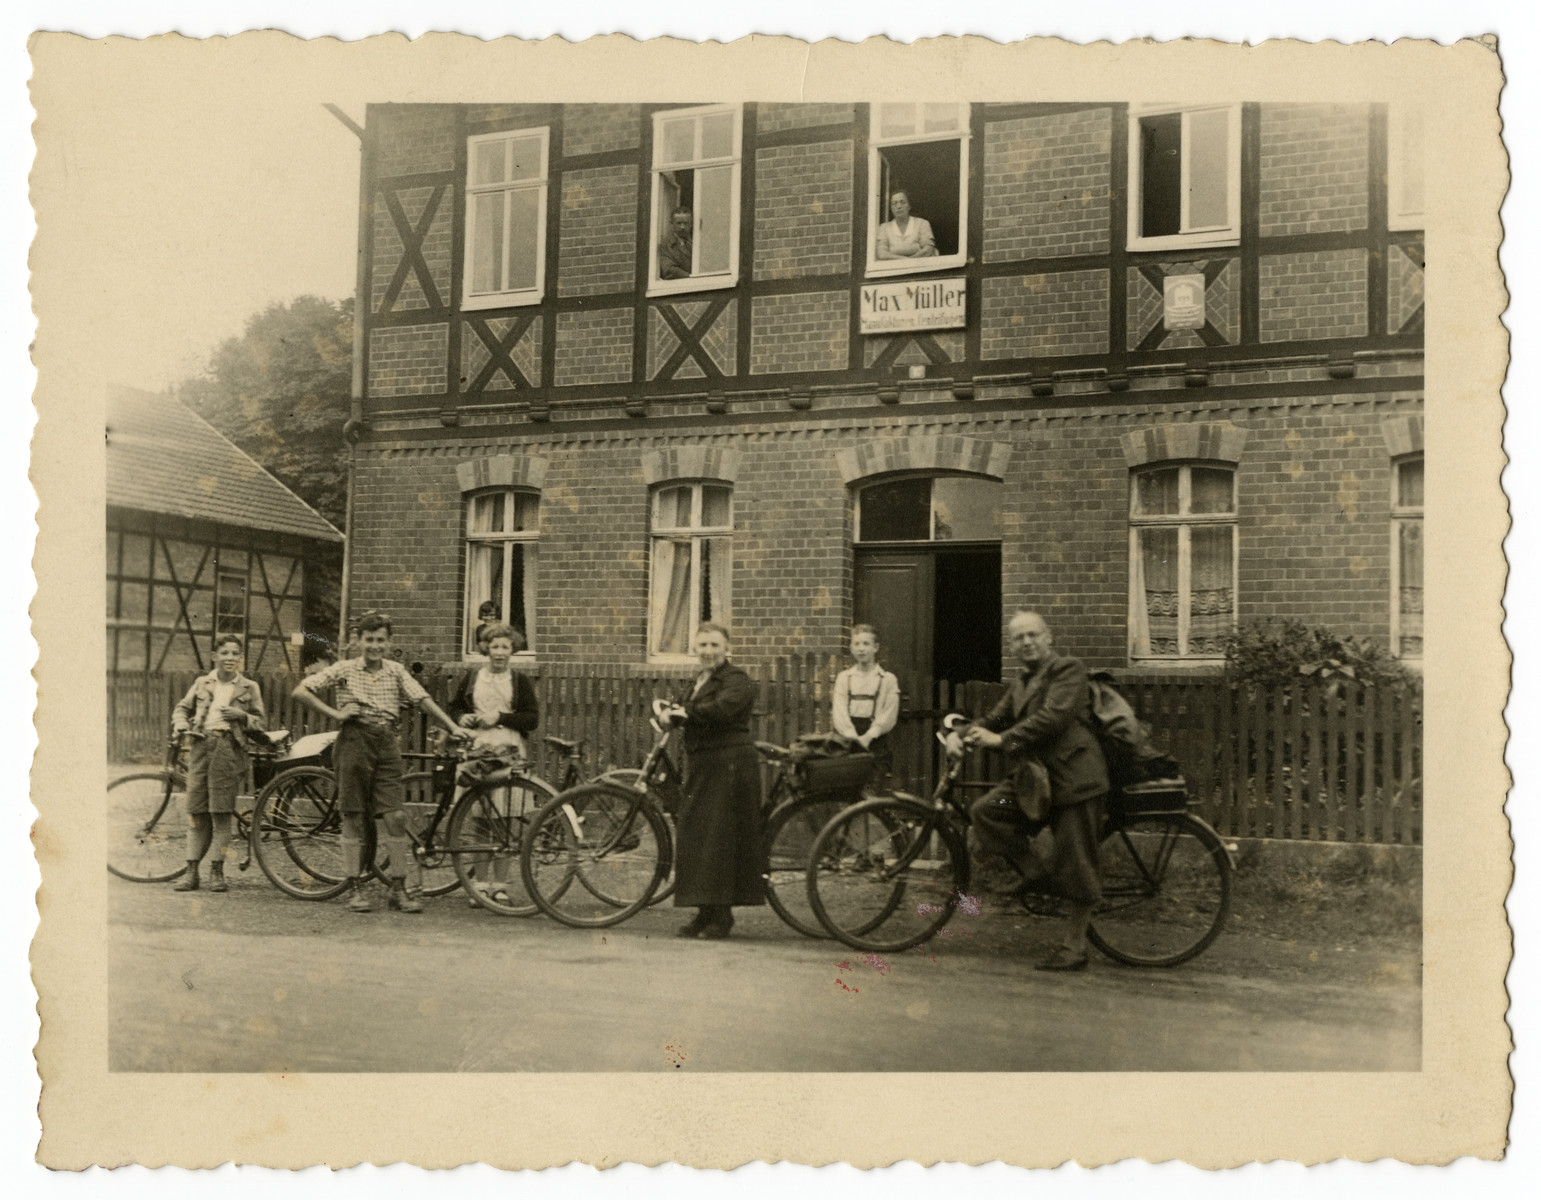 The Mueller family goes for a bicycle ride in front of the home of Sebald Mueller’s brother, Max Mueller.

Standing with their bikes from left to right are:  Norbert Mueller, his cousin Ludwig Stahl, Suse Mueller, Laura Mueller and Sebald Mueller.  The young boy in the lederhosen standing in front of the gate is Norbert’s cousin Willy Mueller, the son of Max Mueller, who appears in the second window from the left on the top floor. Max’s wife is in the next window over.